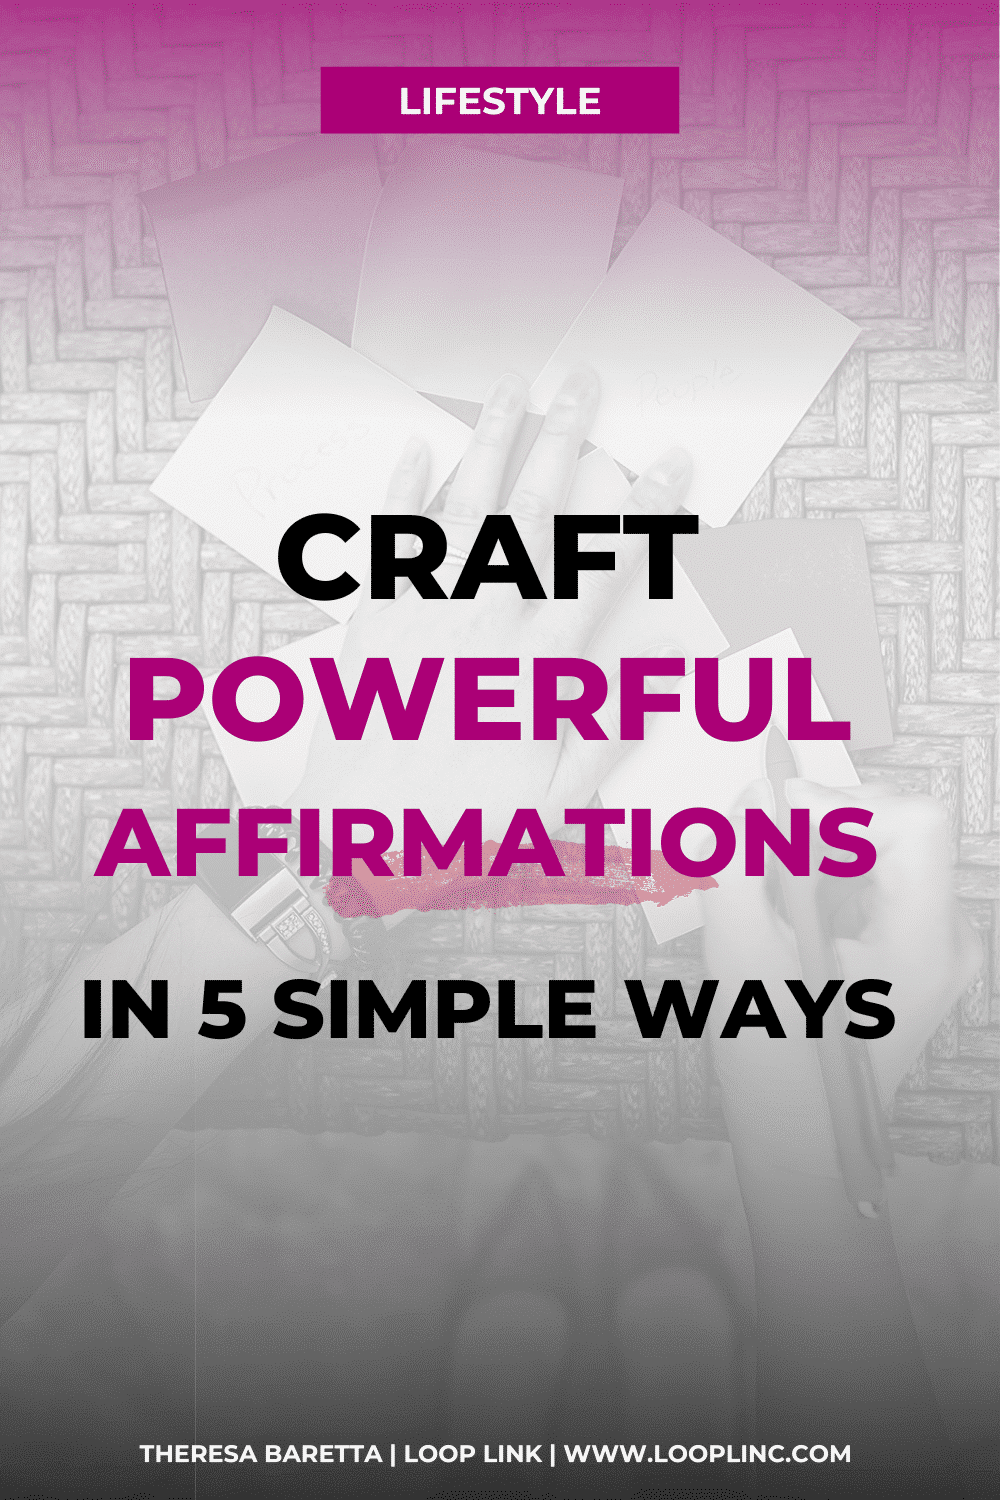 Craft Powerful Affirmations in 5 Simple Ways